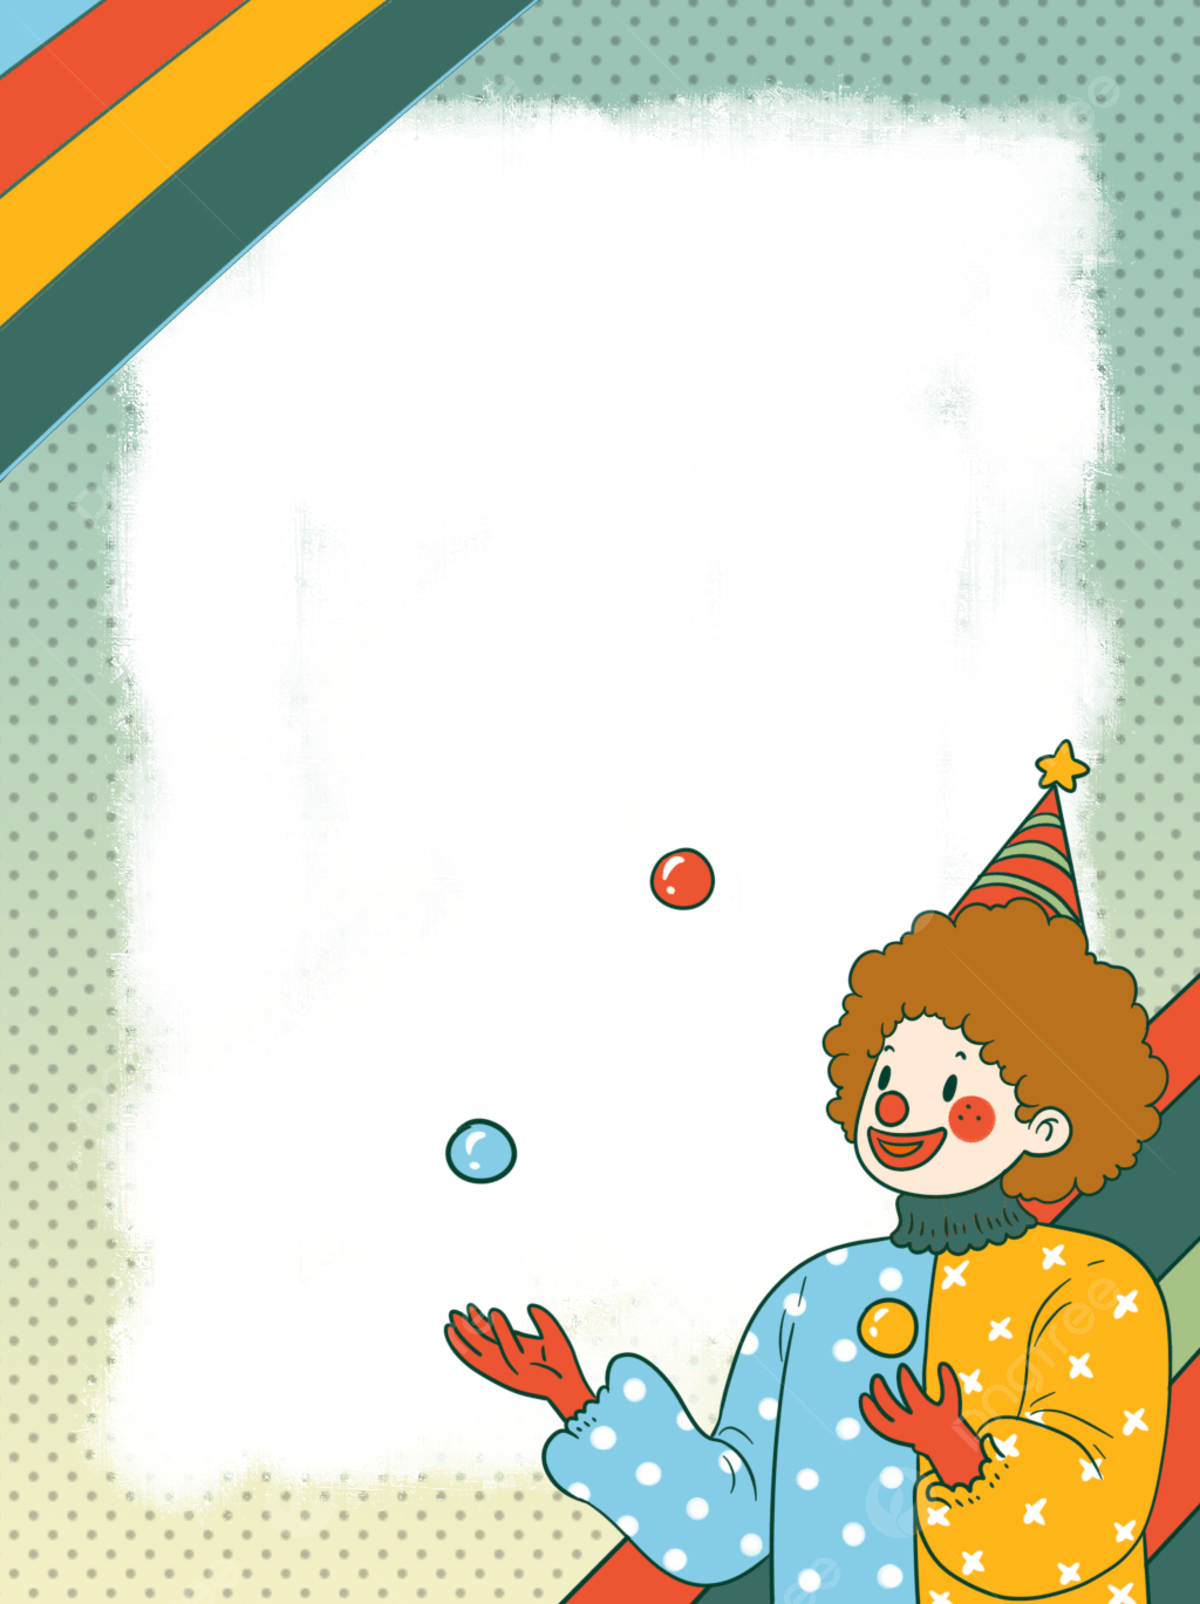 Original Hand Drawn Cartoon Cute Fool S Day Clown Background Wallpaper Image For Free Download